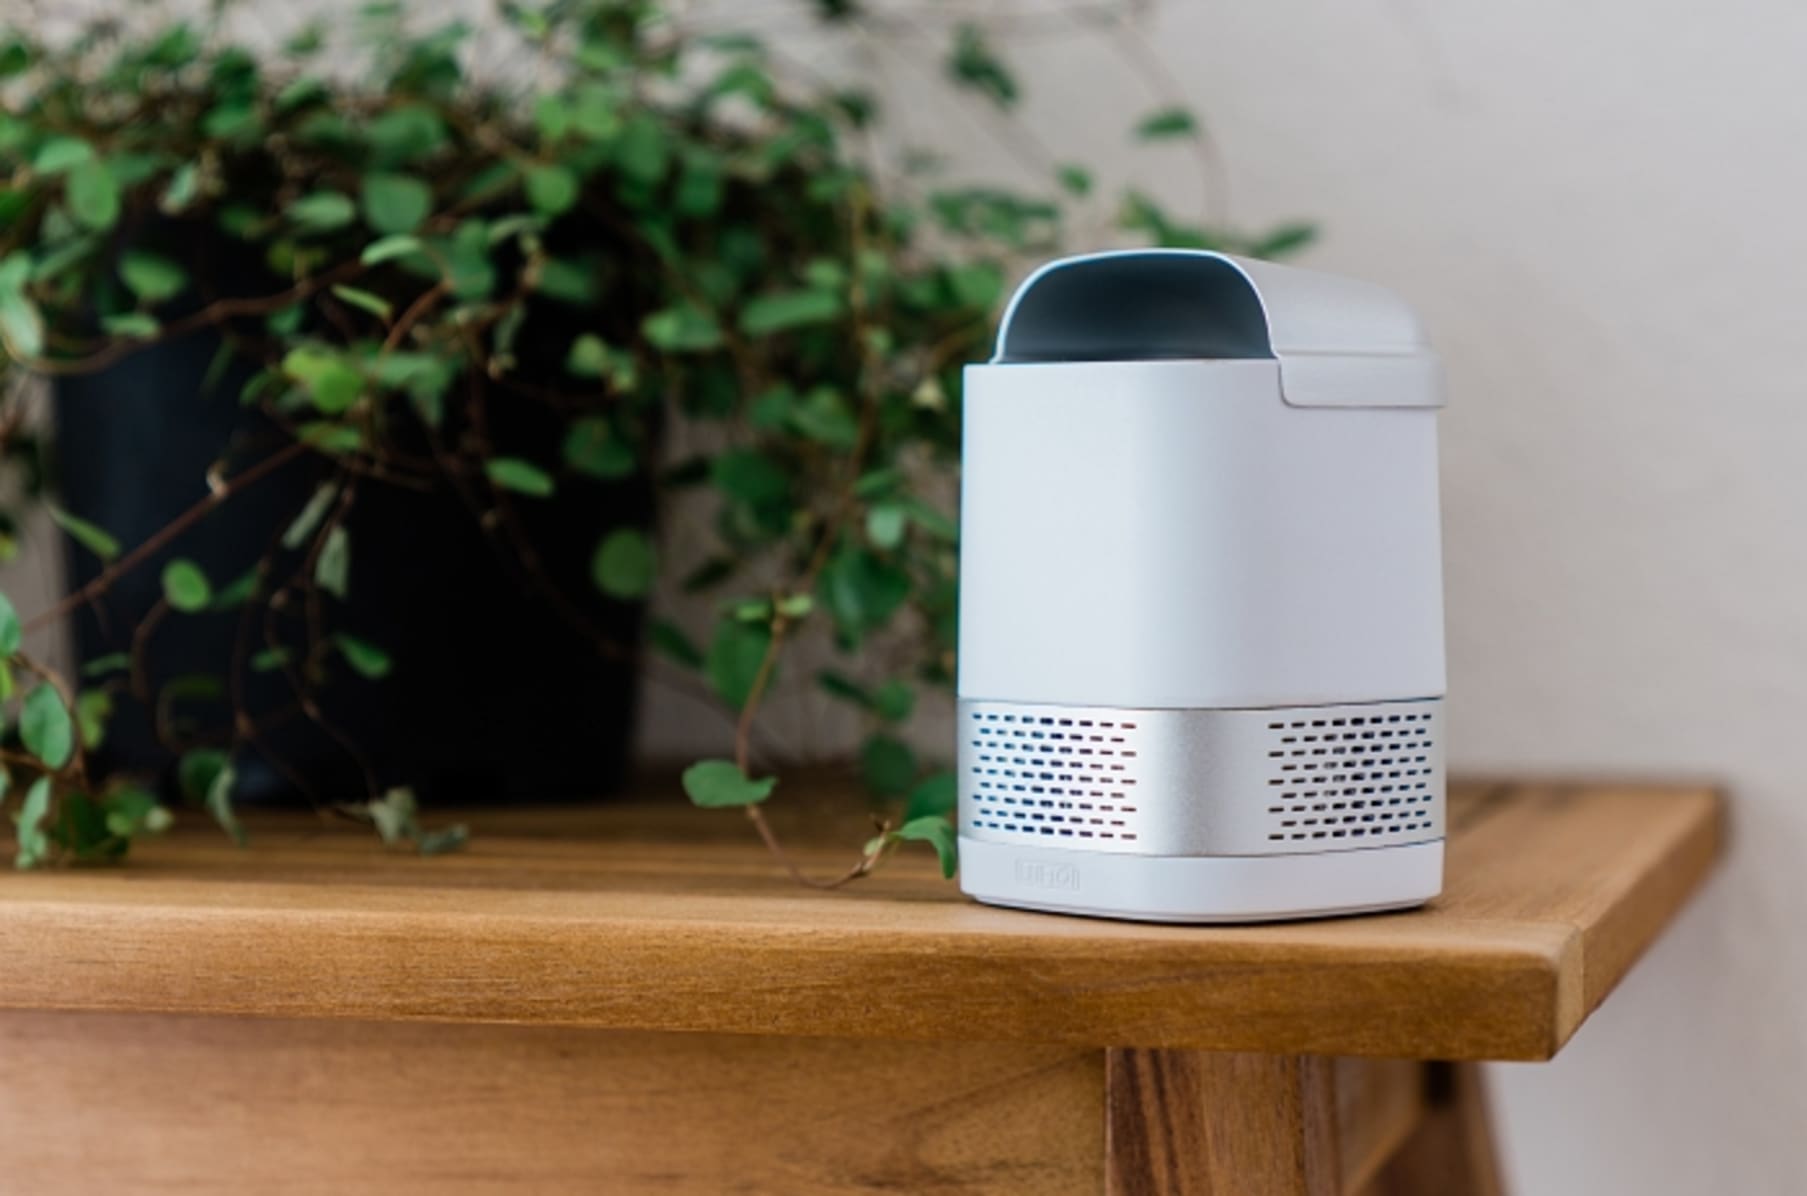 LUFT Duo - Air purified down to the molecule | Indiegogo